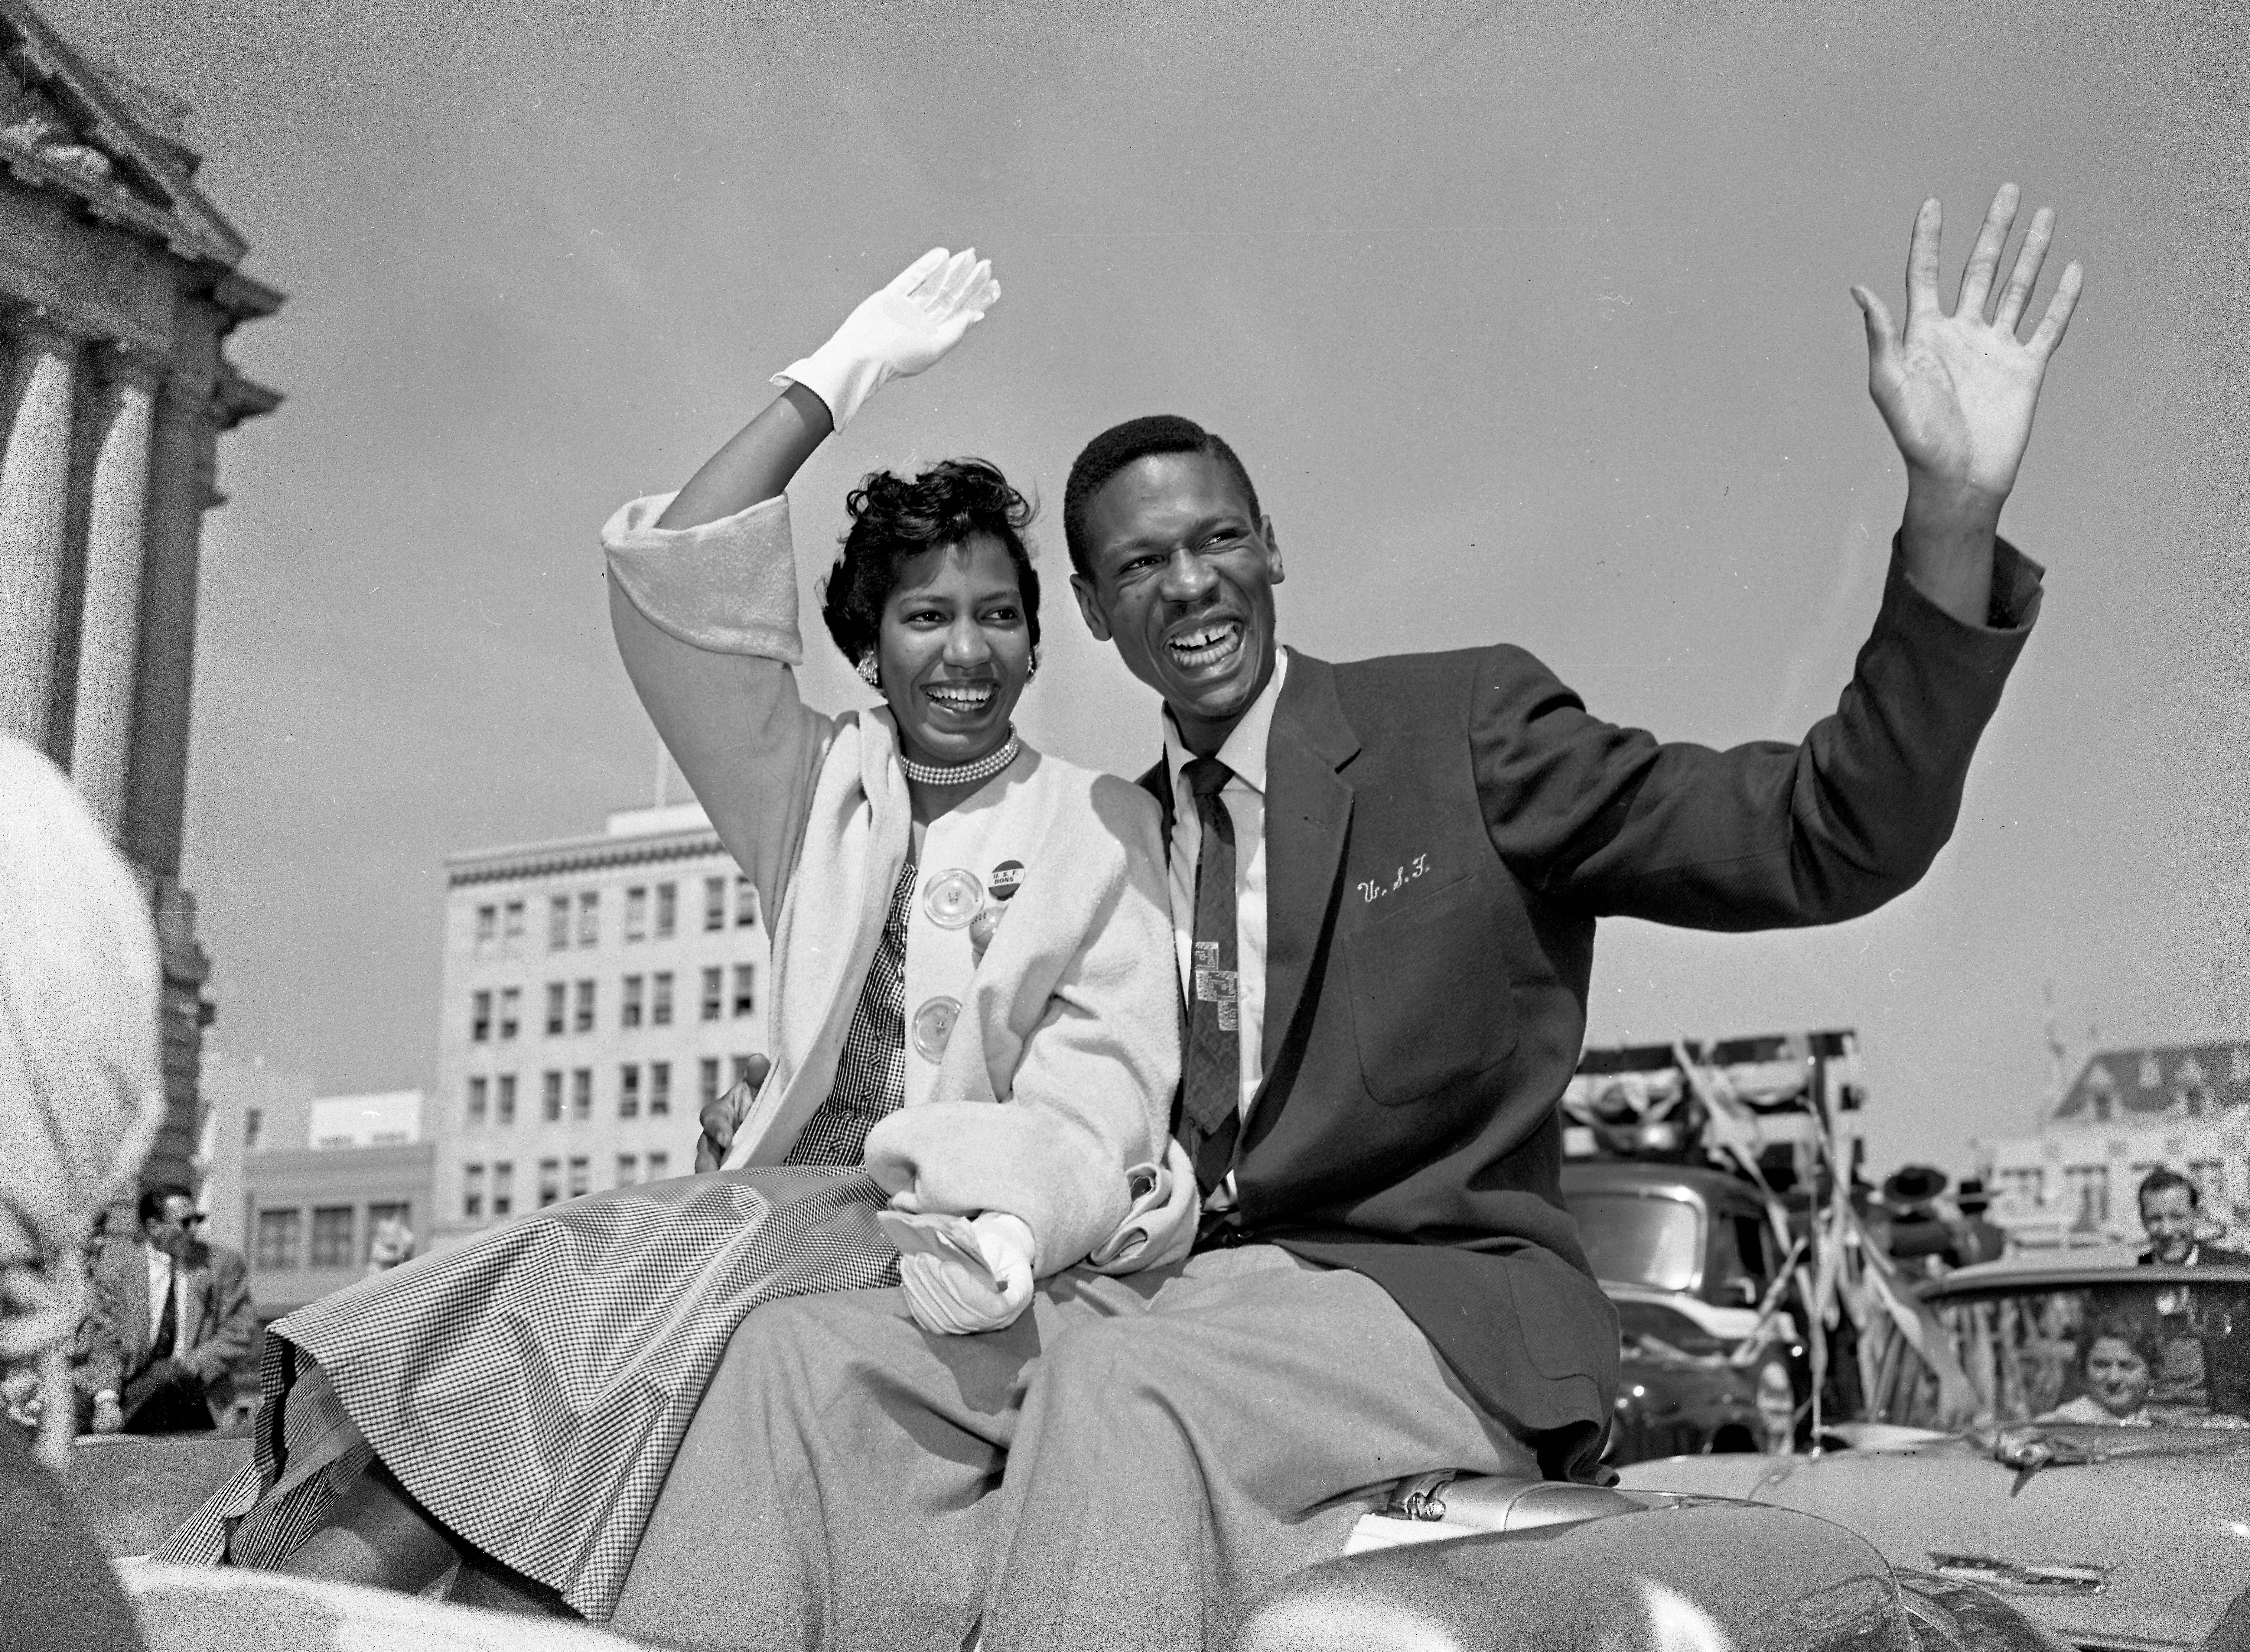 Rose Swisher and Bill Russell ride in a victory parade celebrating the University of San Francisco's national basketball championship in San Francisco on March 22, 1955. | Source: Getty Images